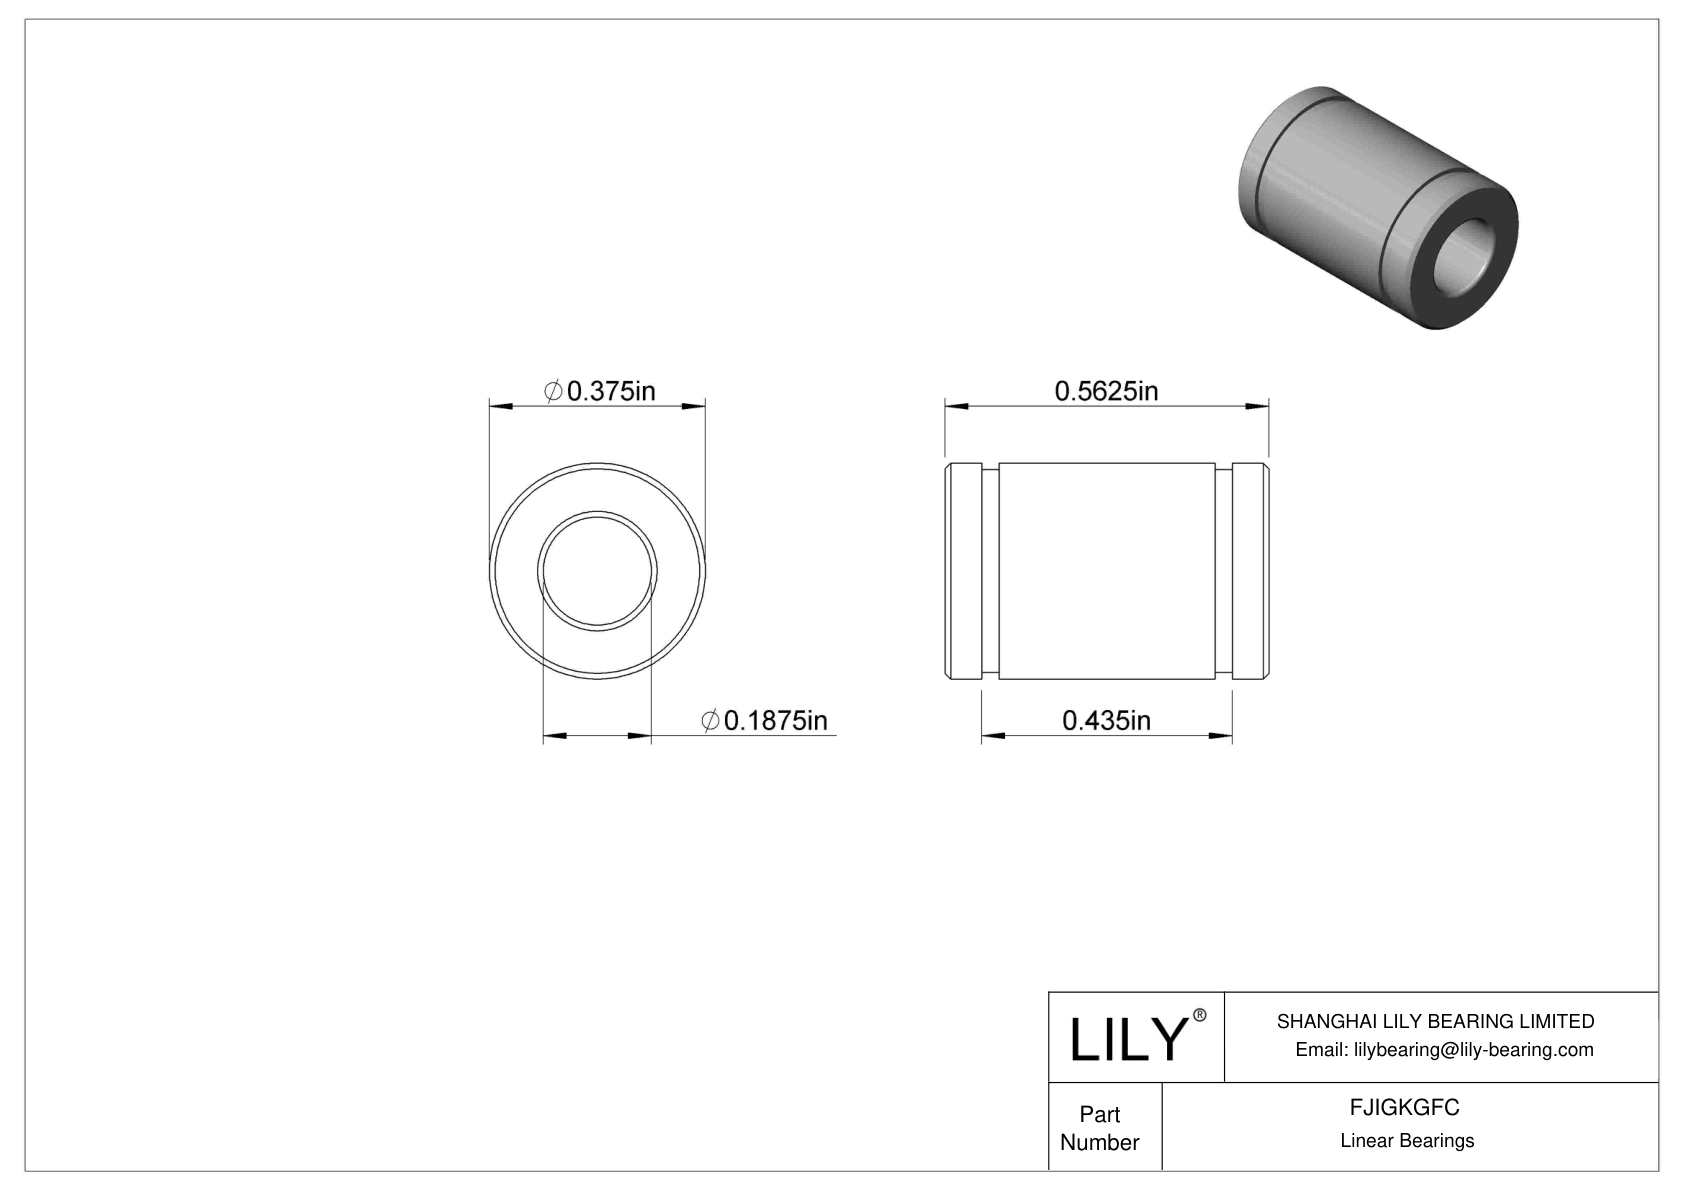 FJIGKGFC Common Linear Sleeve Bearings cad drawing